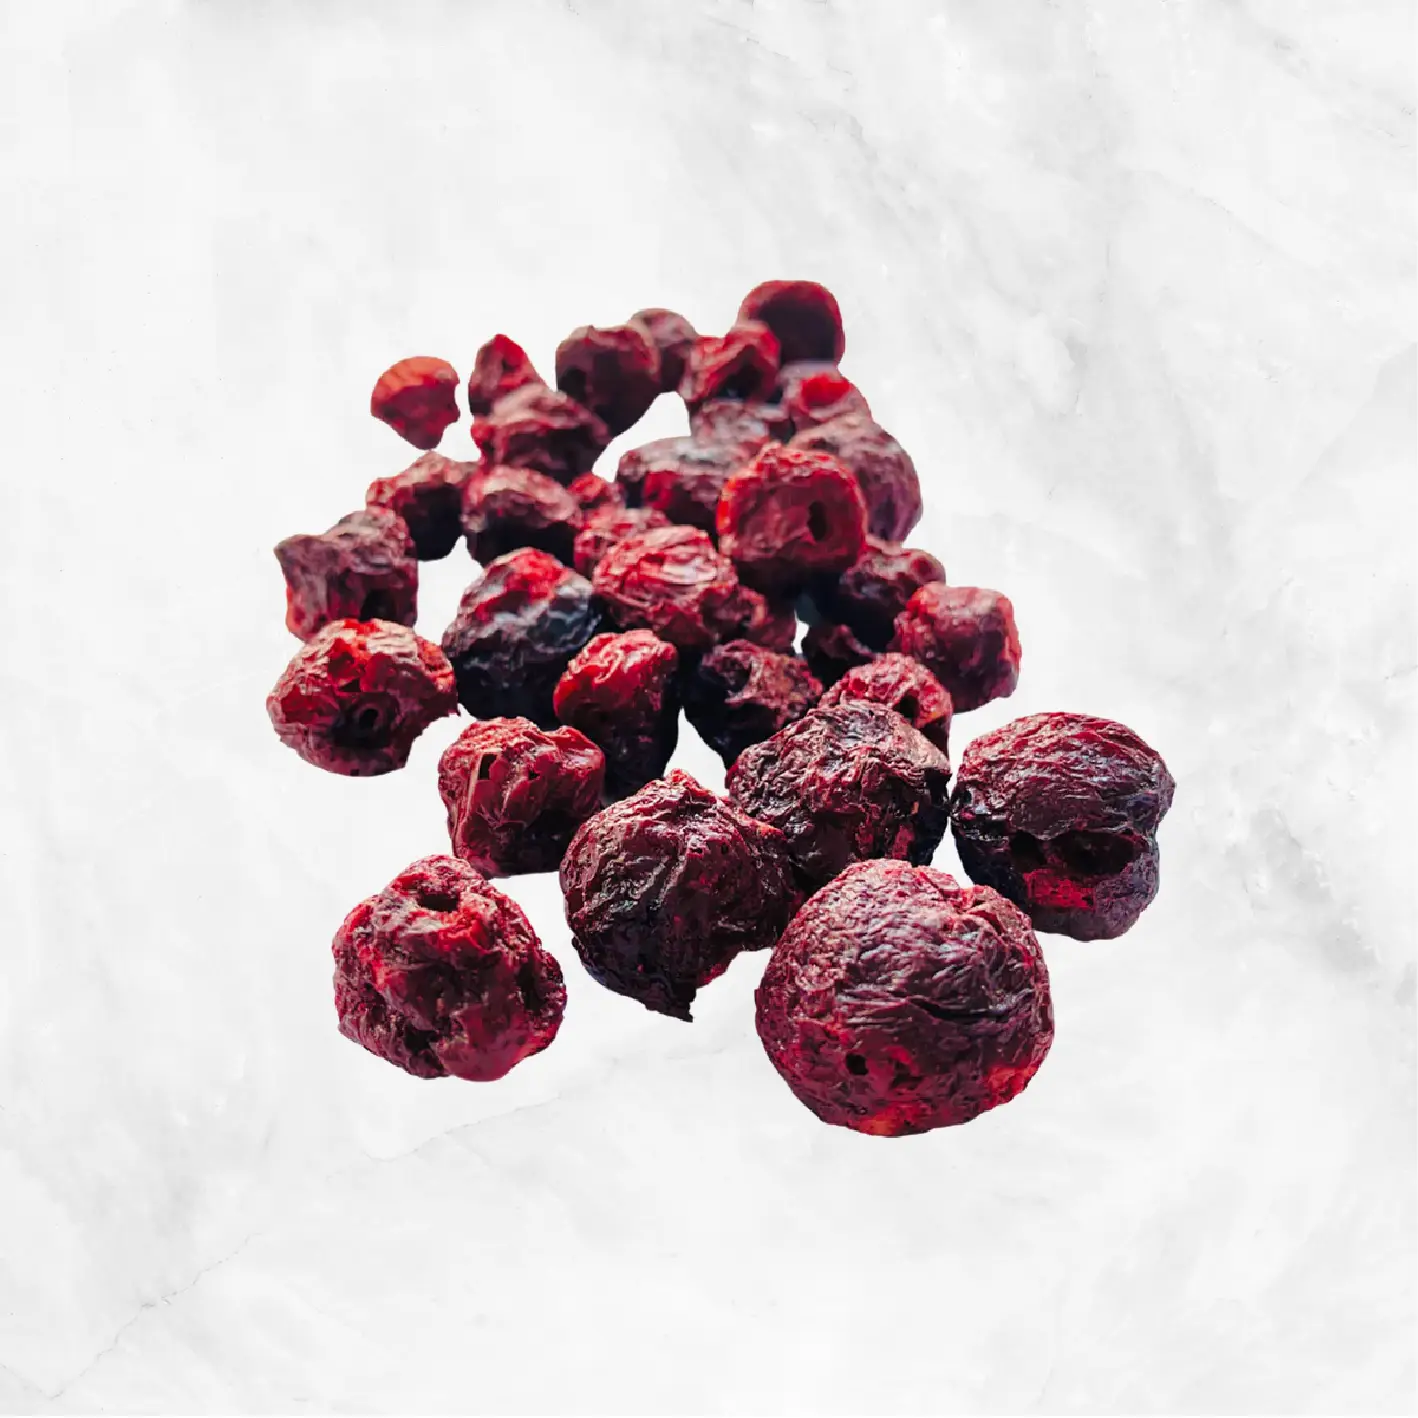 Organic Freeze - Dried Cherries Delivery